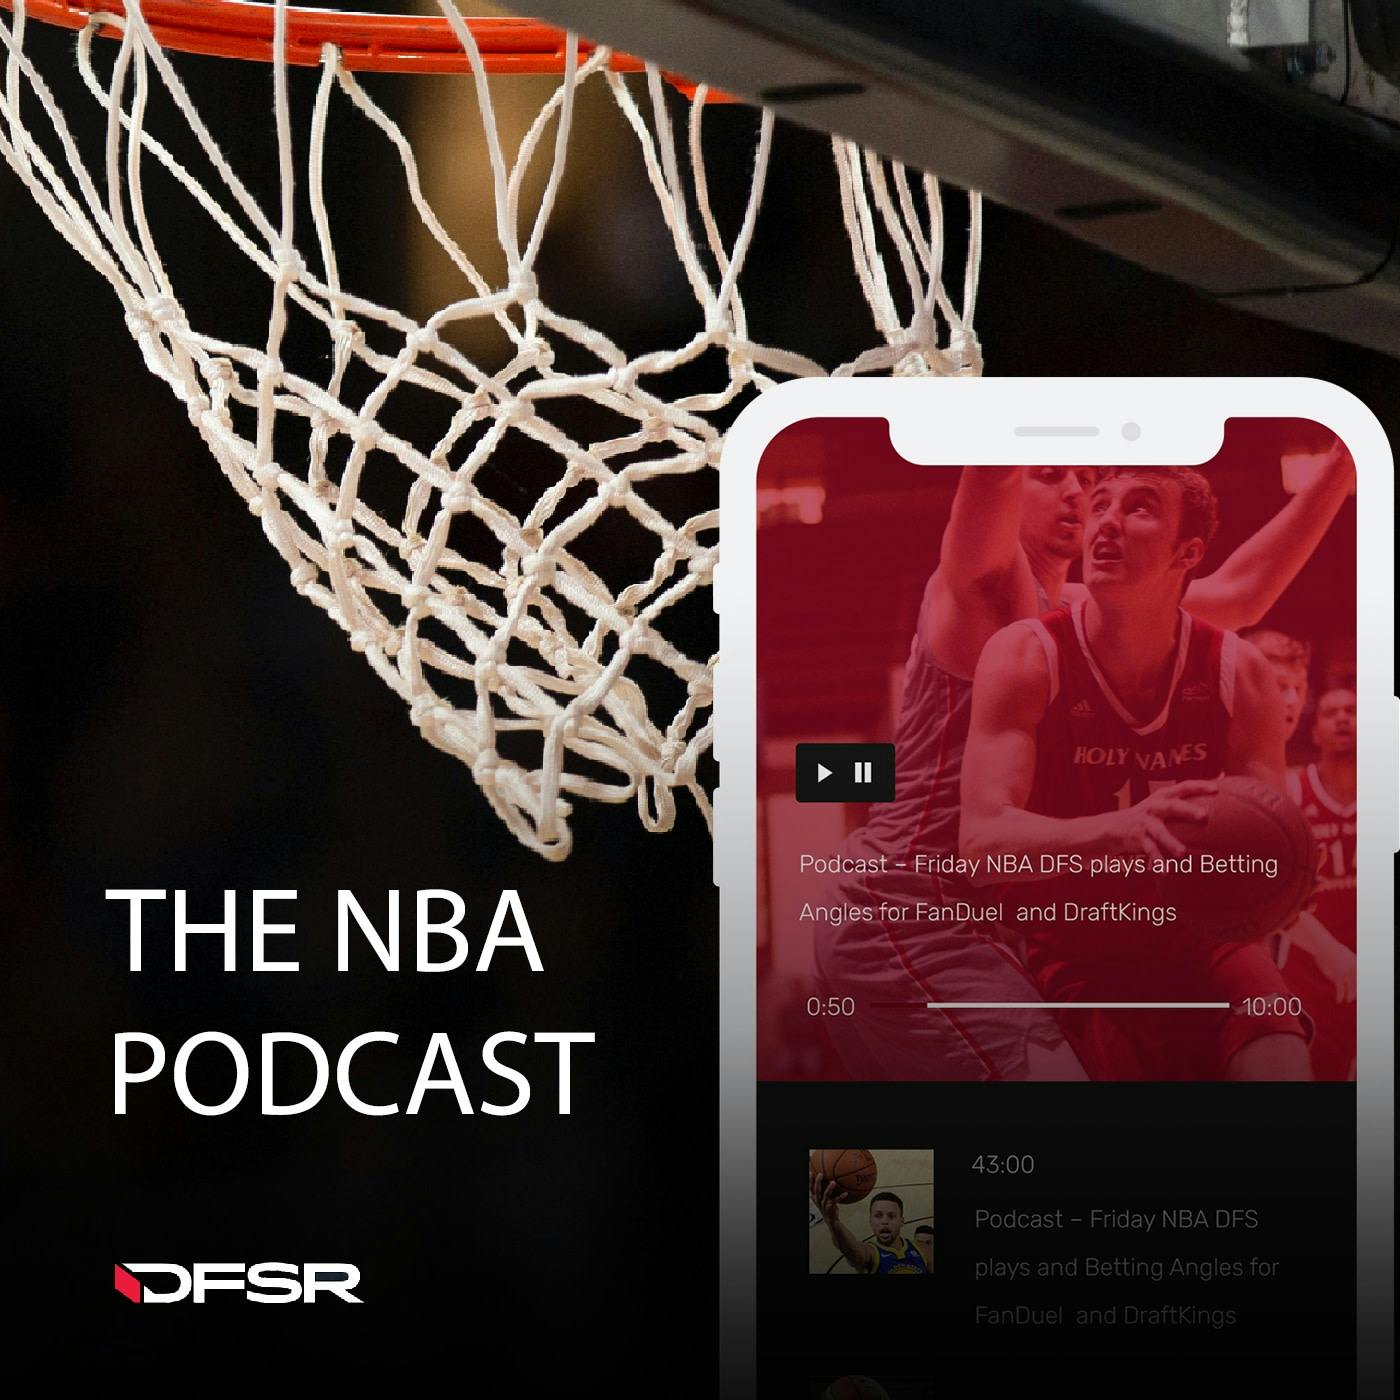 DFS and Betting NBA Podcast for FanDuel and DraftKings - Wednesday 11/28/18